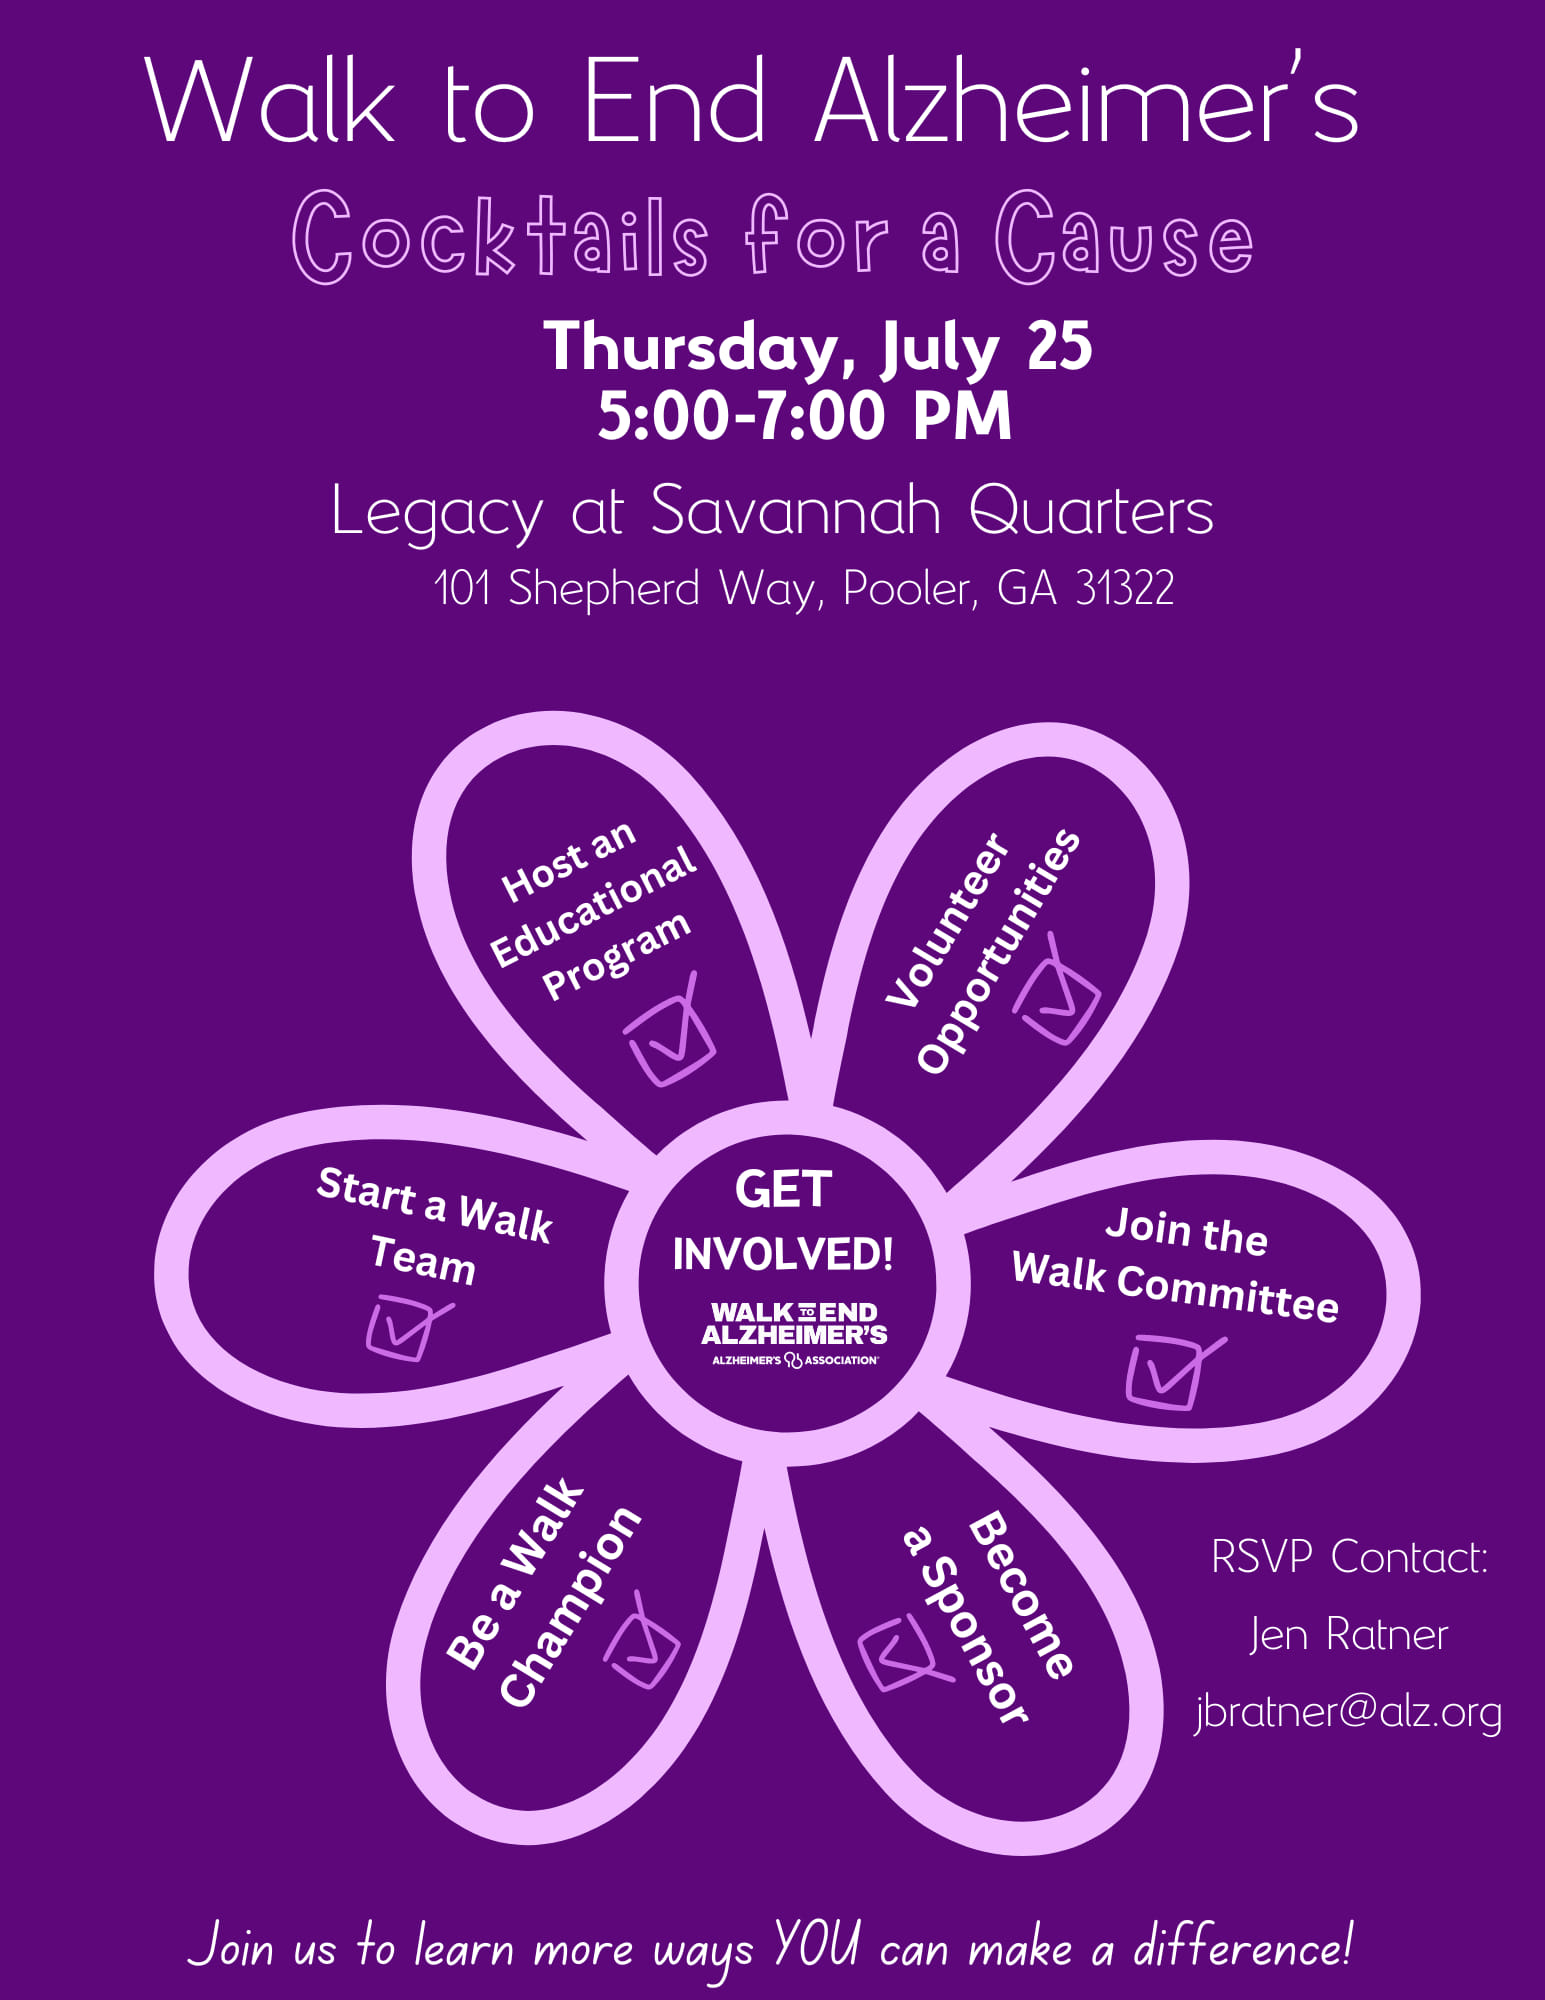 POOLER, GA—Legacy at Savannah Quarters is shaking things up for a good cause. The senior living community is hosting a “Cocktails for a Cause” event on July 25 from 5 to 7 p.m. to support the Coastal Georgia Walk to End Alzheimer’s. Guests are invited to sip, socialize, and make a difference.

Event details:
•	Date: Thursday, July 25, 2024
•	Time: 5–7 p.m.
•	Location: Legacy at Savannah Quarters, 101 Shepherd Way Pooler GA 31322

Attendees can enjoy complimentary cocktails while mingling with fellow community members and learning about the Alzheimer’s Association’s impact on the local community. The event will also feature Alzheimer’s Association resources and a chance to sign up for the November 9th Walk to End Alzheimer’s. 

“We’re excited to raise a glass for such an important cause,” said Marcus Brisco, Executive Director of Legacy at Savannah Quarters. “Alzheimer’s touches countless lives, and everyone at Legacy at Savannah Quarters is committed to being part of the solution.”

The local media are invited to attend the event and highlight the community’s efforts to support the Alzheimer’s Association. For more information about Legacy at Savannah Quarters, please visit their website.